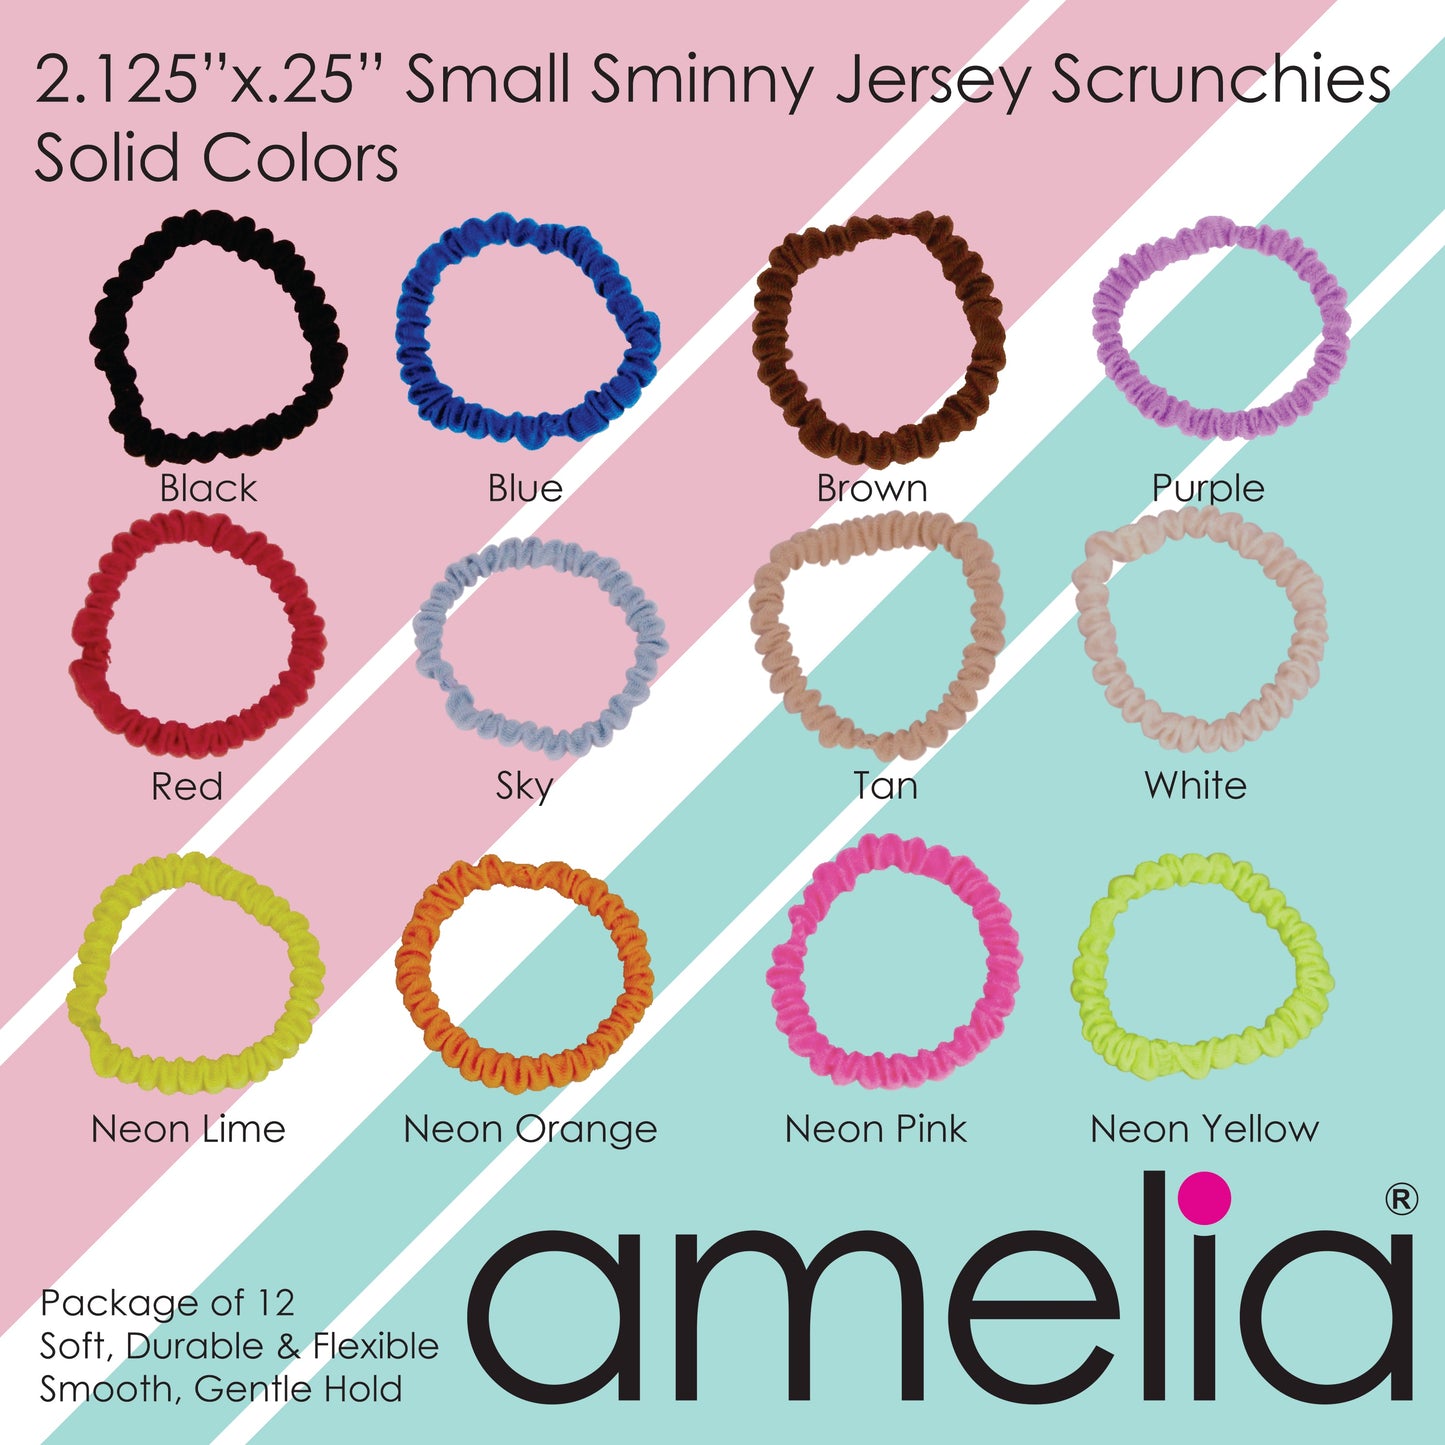 Amelia Beauty, Brown Skinny Jersey Scrunchies, 2.125in Diameter, Gentle on Hair, Strong Hold, No Snag, No Dents or Creases. 12 Pack